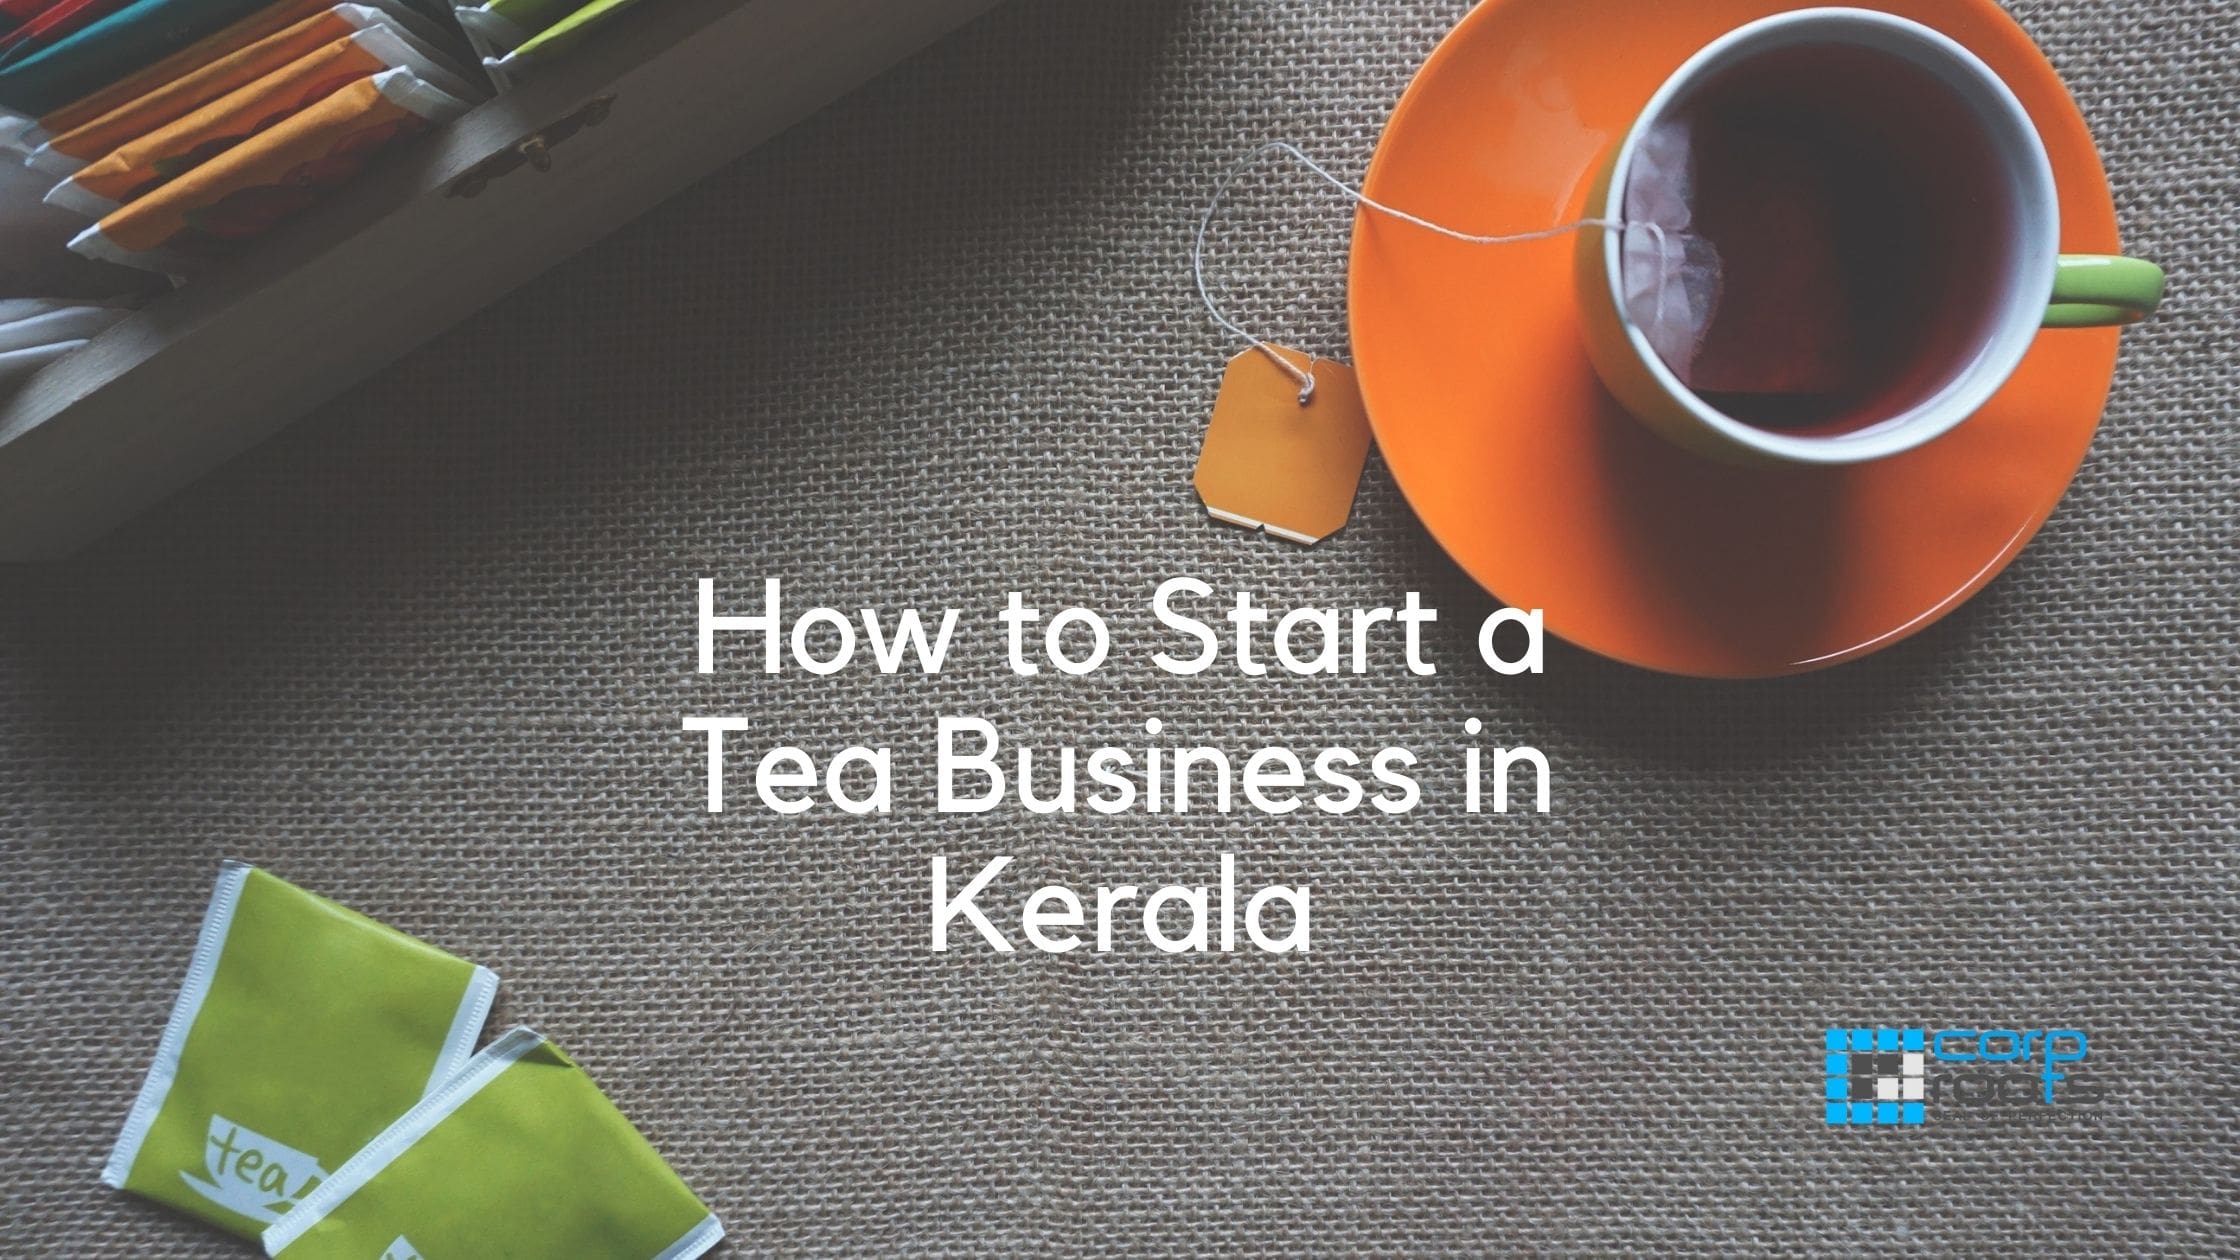 Company Registration in Kerala | Fastest Business set up – Frame My Company